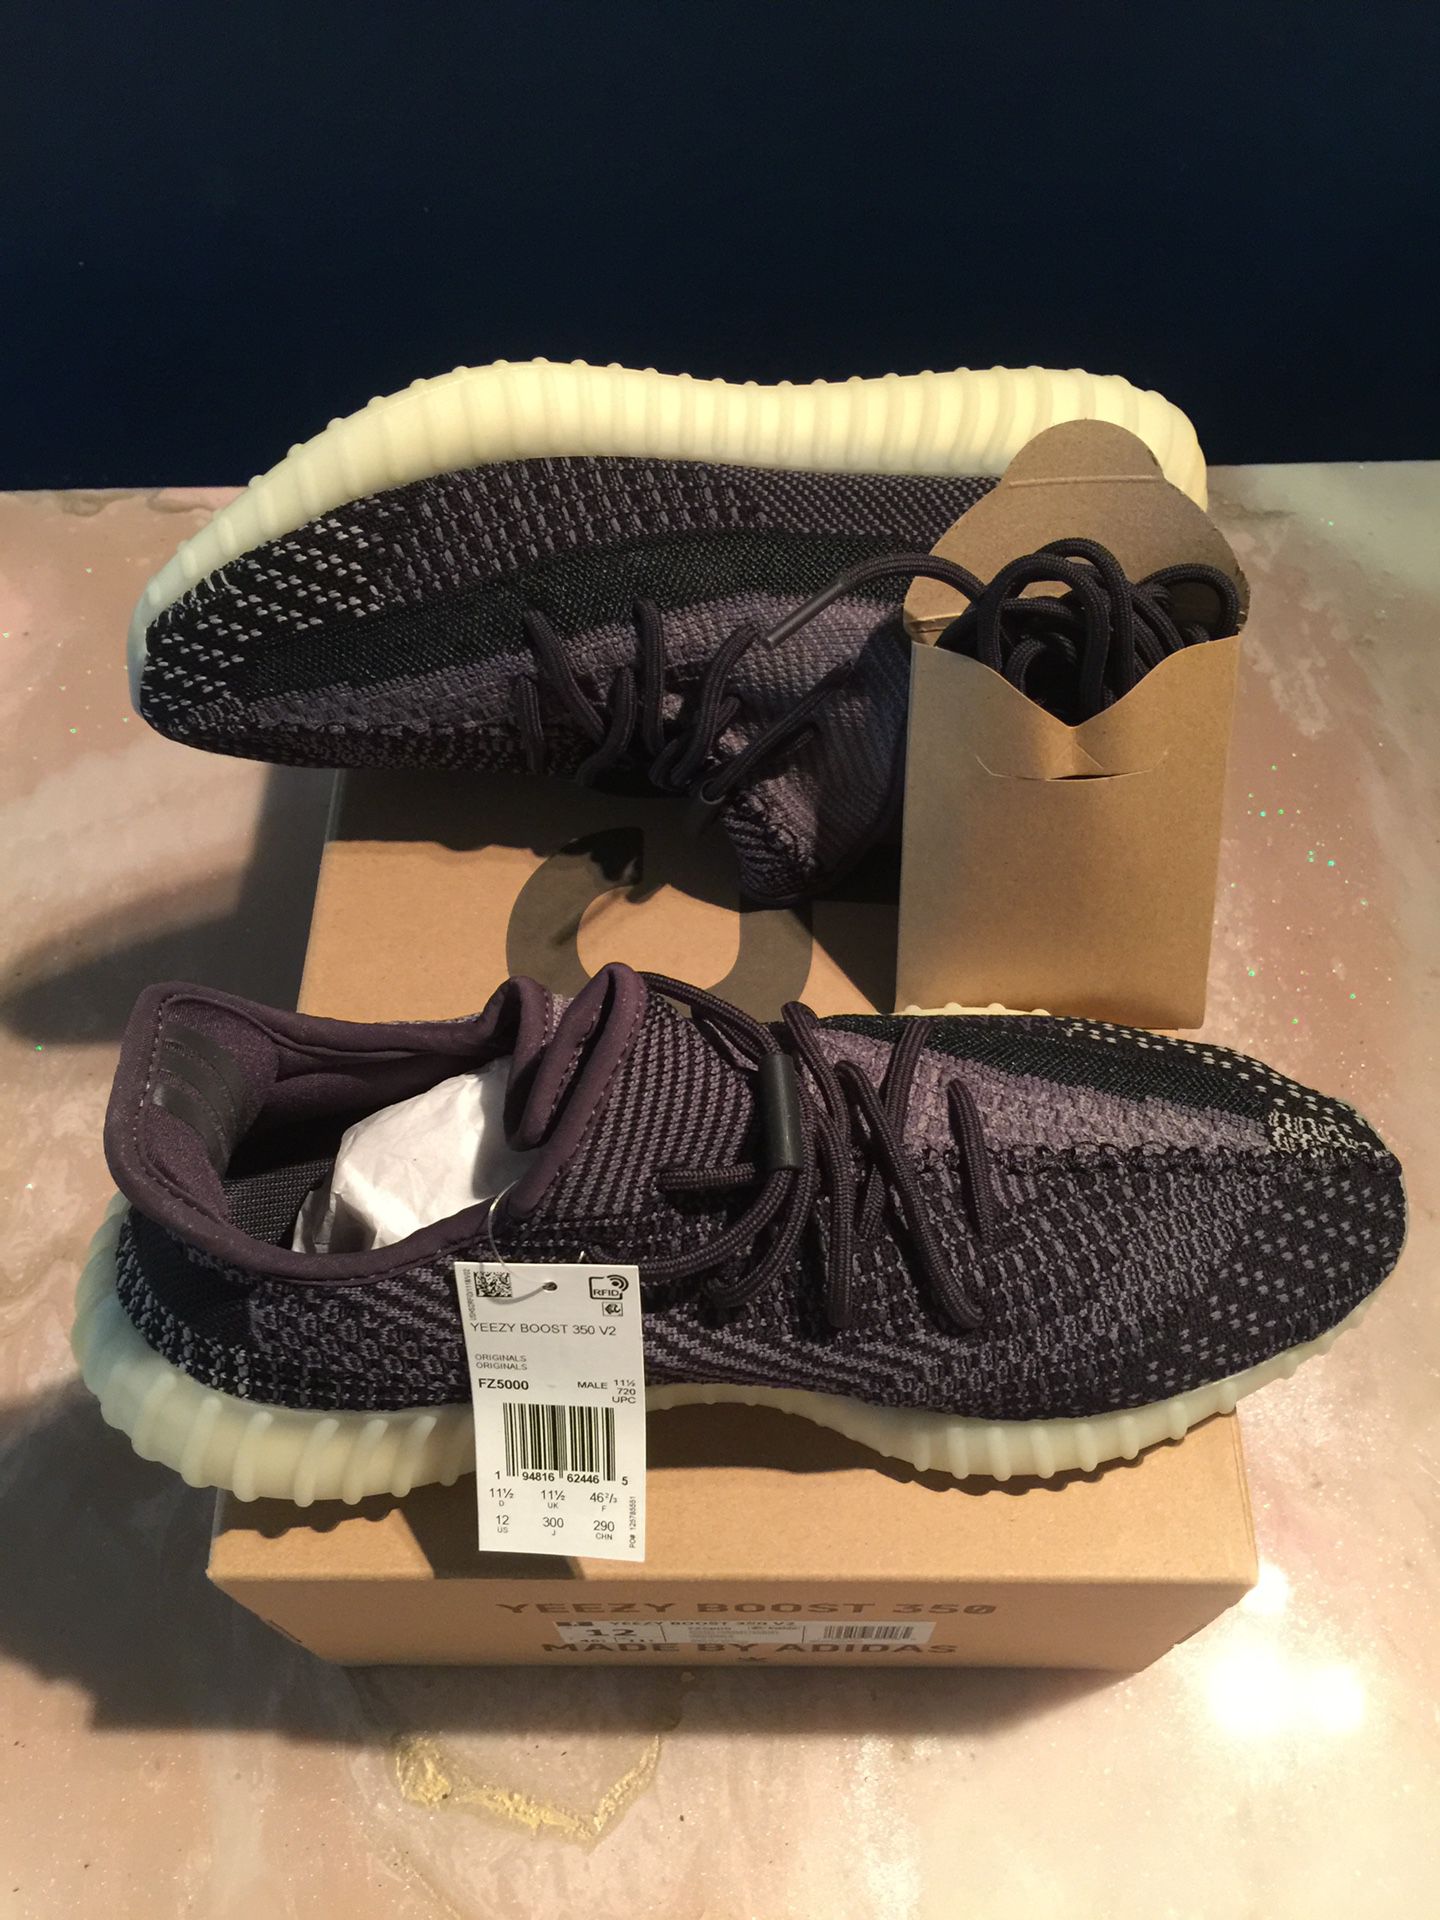 Brand new in the box Yeezy carbon boost 350 V2 Adults size 12 Article no FZ5000 Tags Shoes sneakers sneaker comp yeezys adidas men man shoes women s